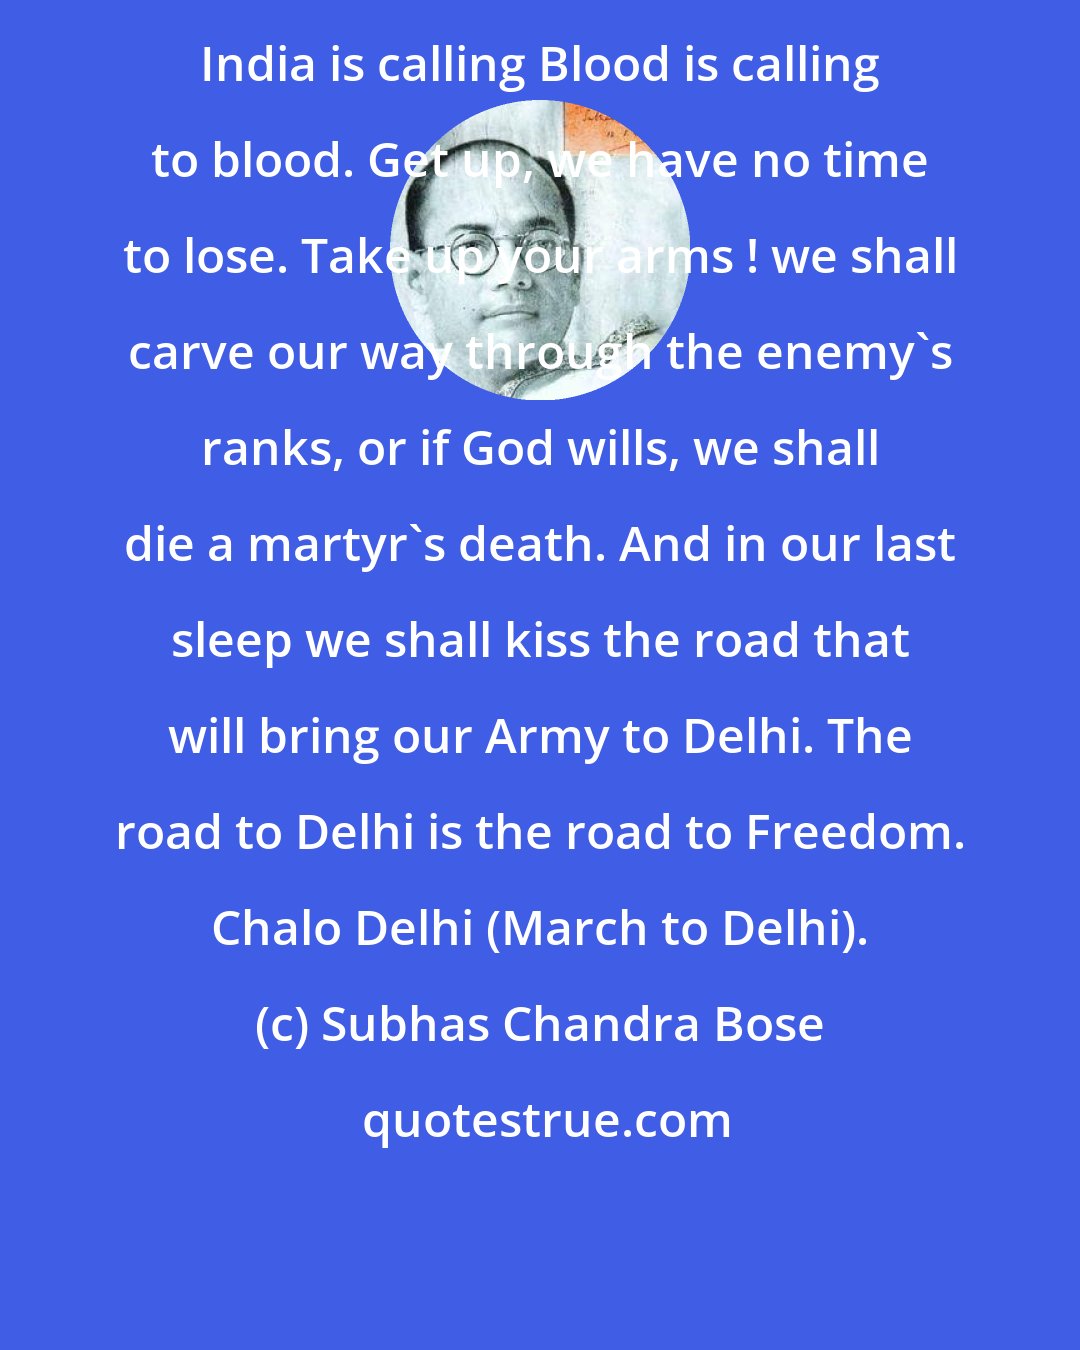 Subhas Chandra Bose: India is calling Blood is calling to blood. Get up, we have no time to lose. Take up your arms ! we shall carve our way through the enemy's ranks, or if God wills, we shall die a martyr's death. And in our last sleep we shall kiss the road that will bring our Army to Delhi. The road to Delhi is the road to Freedom. Chalo Delhi (March to Delhi).